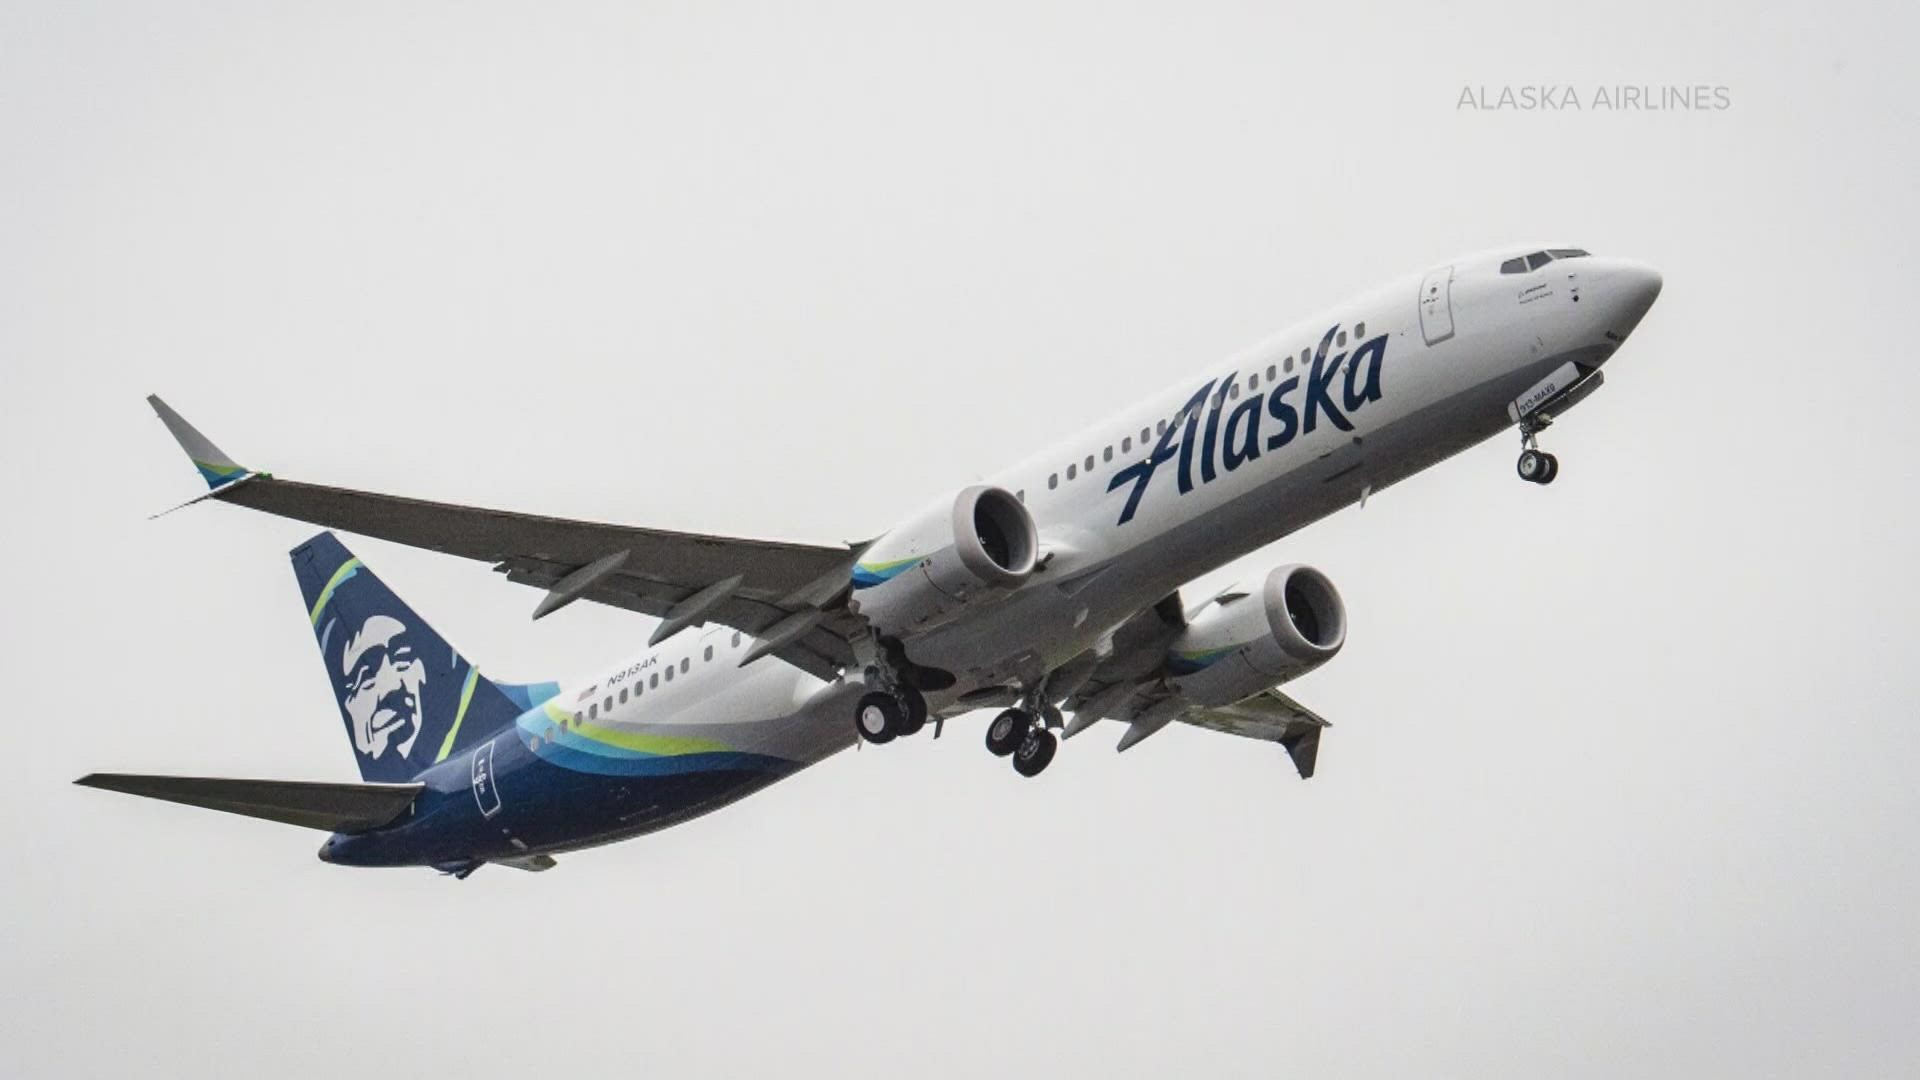 Alaska Airlines said it will purchase 52 737 MAX planes between 2024 and 2027.